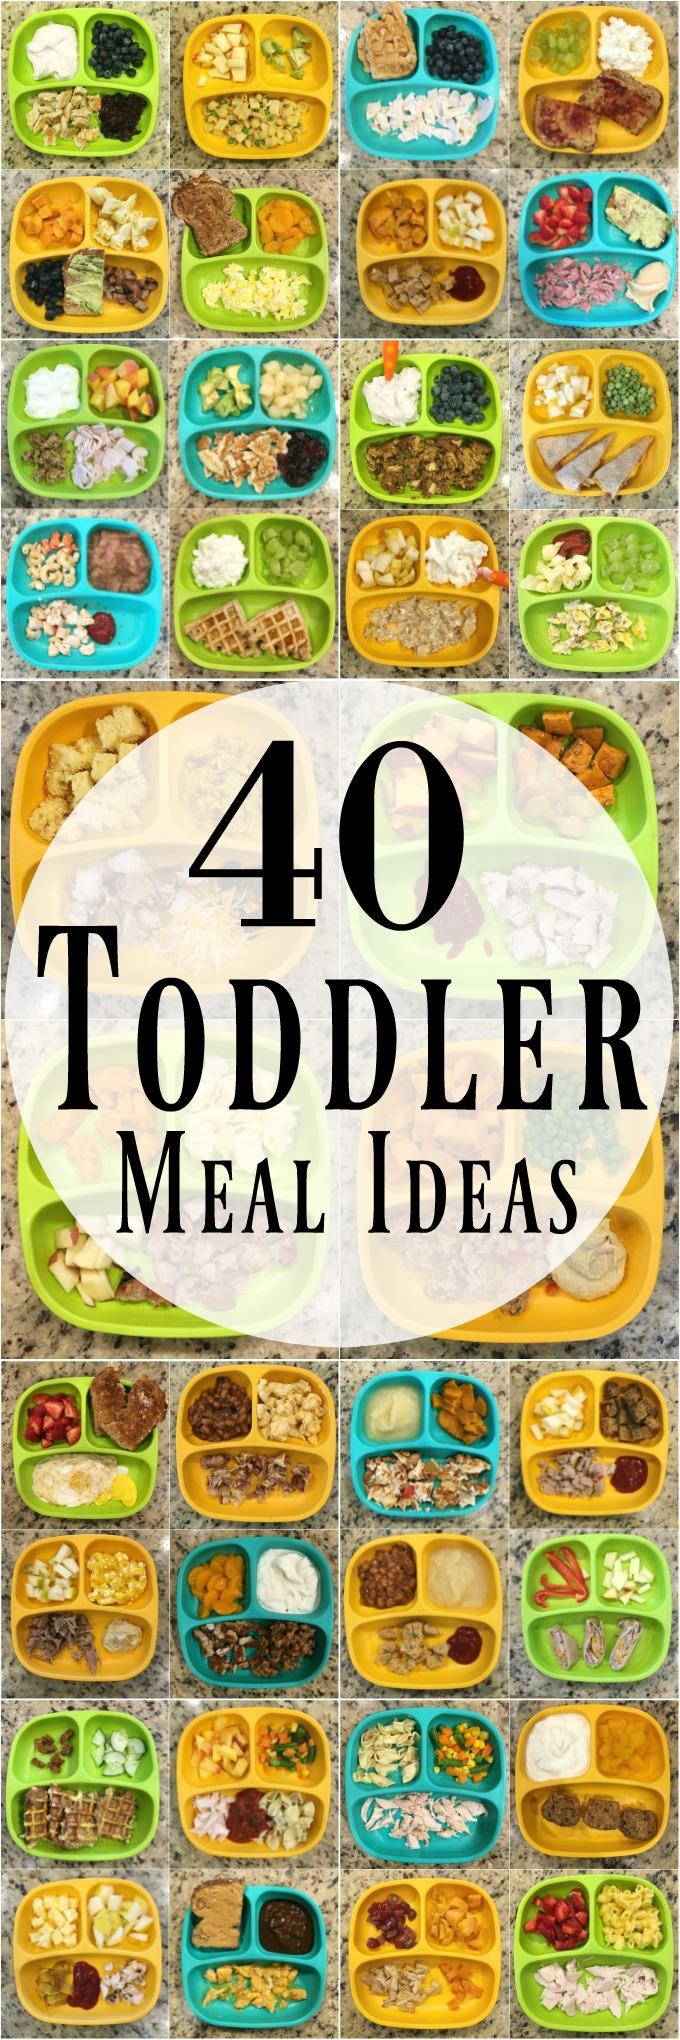 These healthy toddler meal ideas will help you make healthy breakfast, lunch and dinner options for the kids!